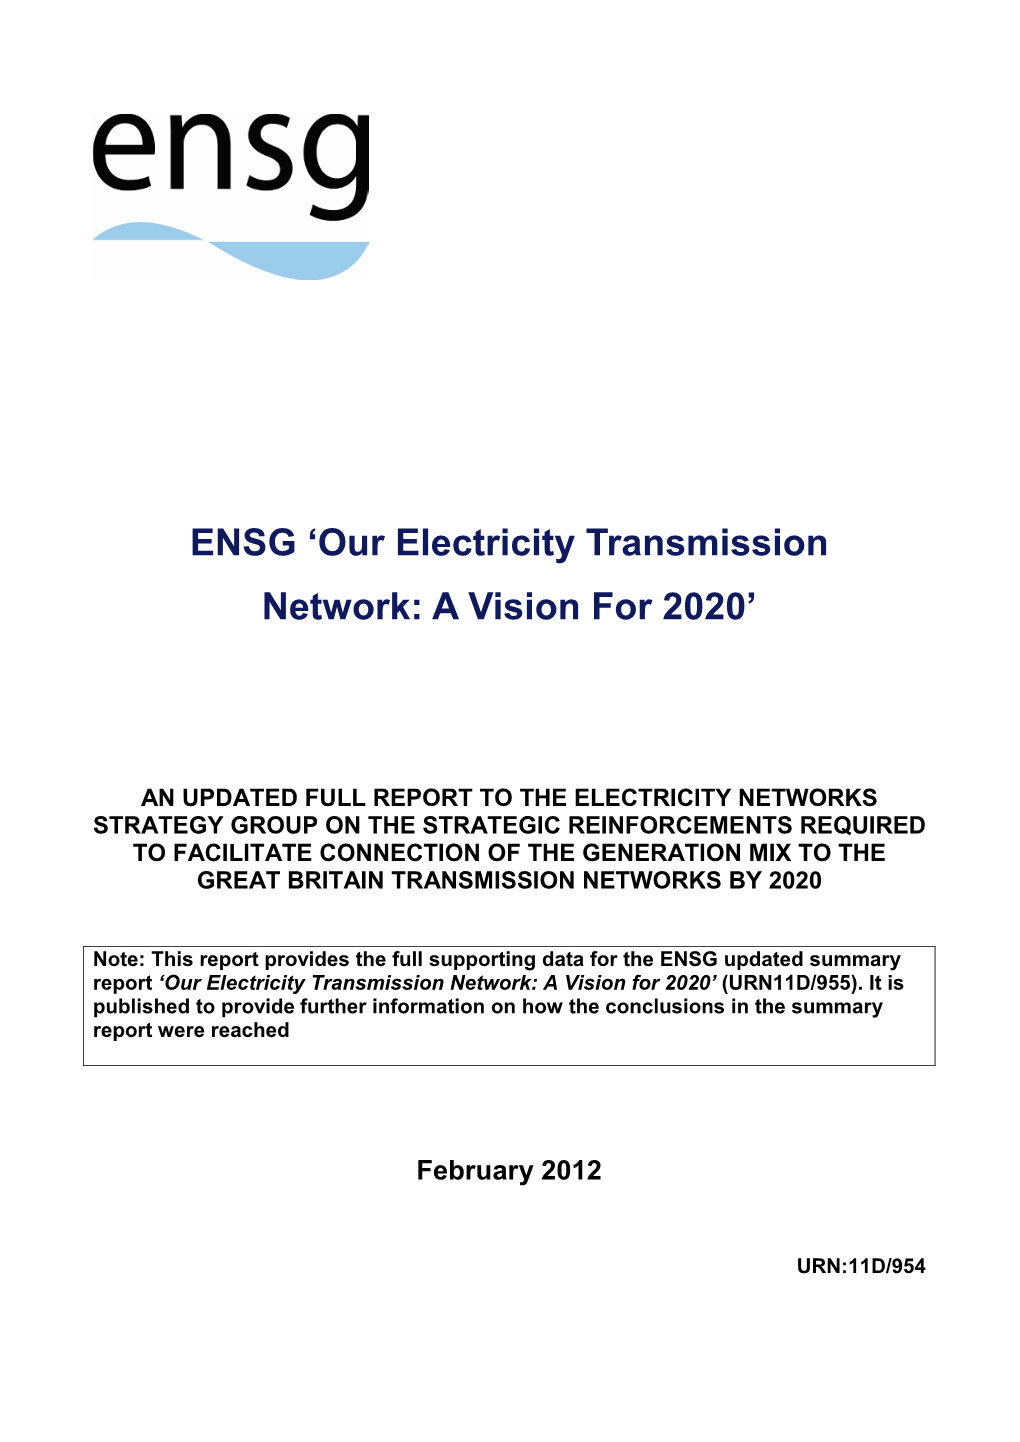 ENSG 'Our Electricity Transmission Network: a Vision for 2020'